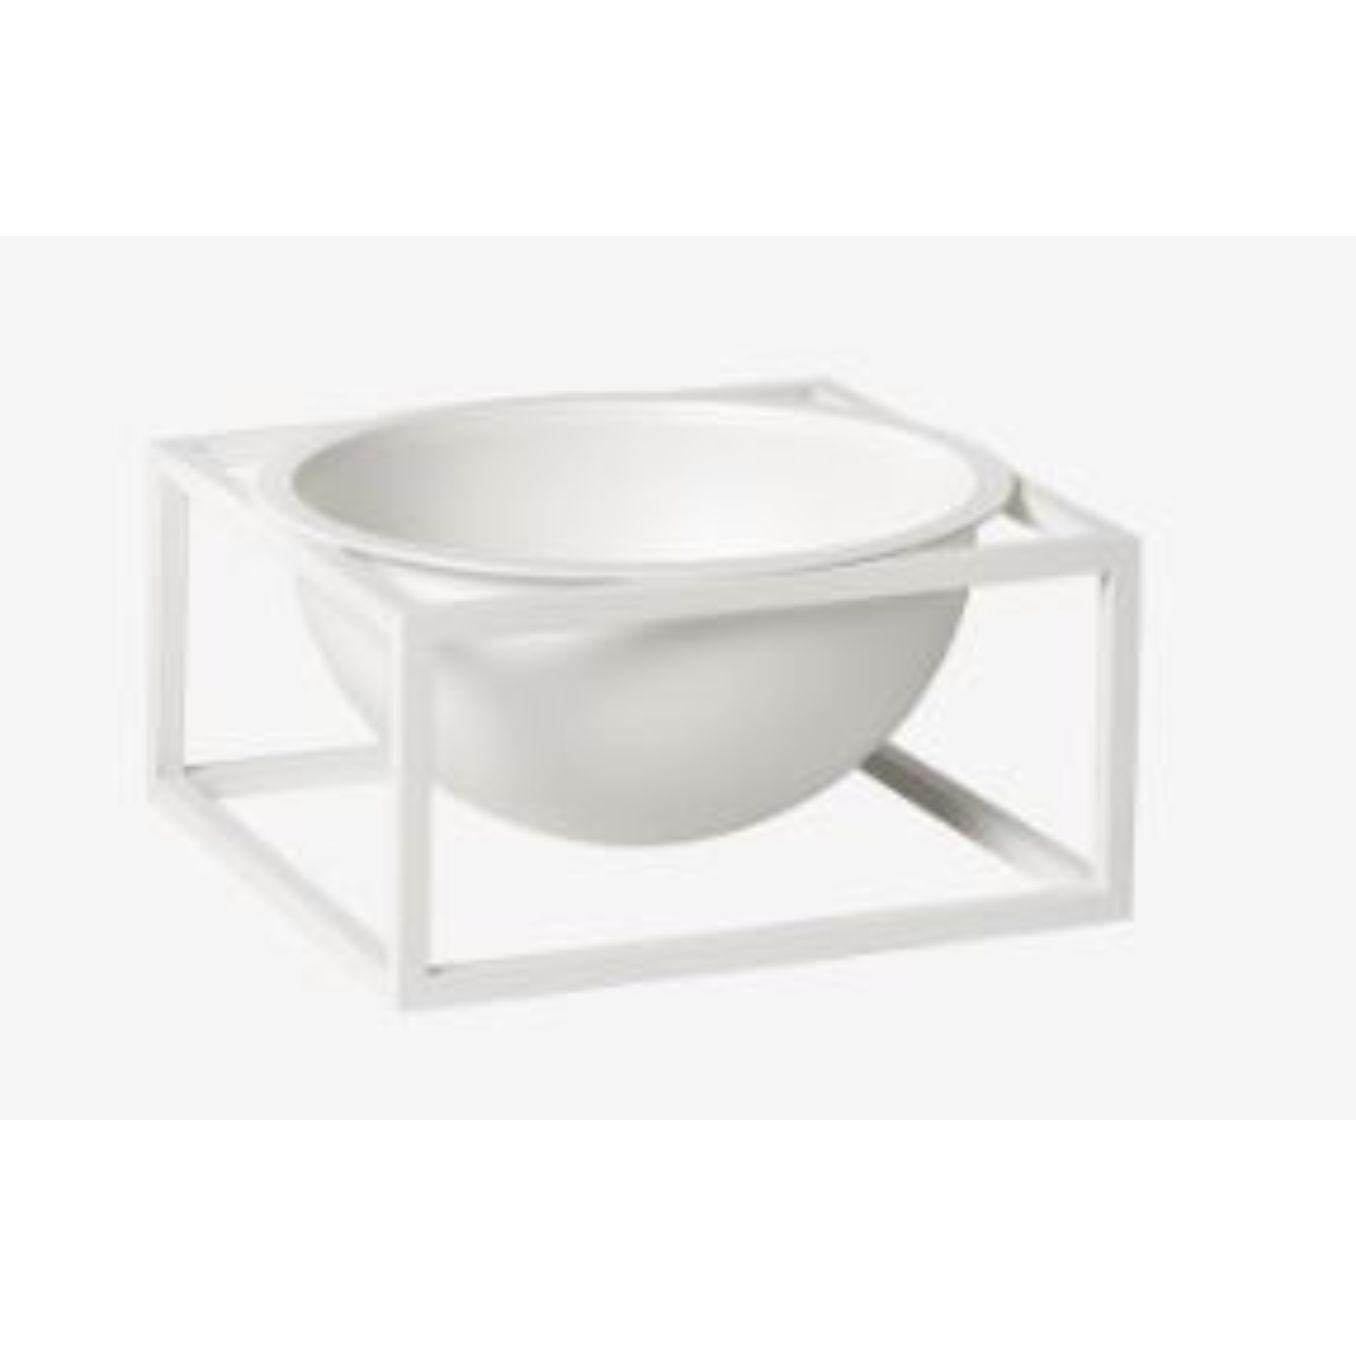 White small centerpiece Kubus bowl by Lassen
Dimensions: D 14 x W 14 x H 7 cm 
Materials: Metal 
Weight: 1.35 Kg

The dictionary definition is “an object occupying a central, especially an adornment in the center of a table” and the Kubus